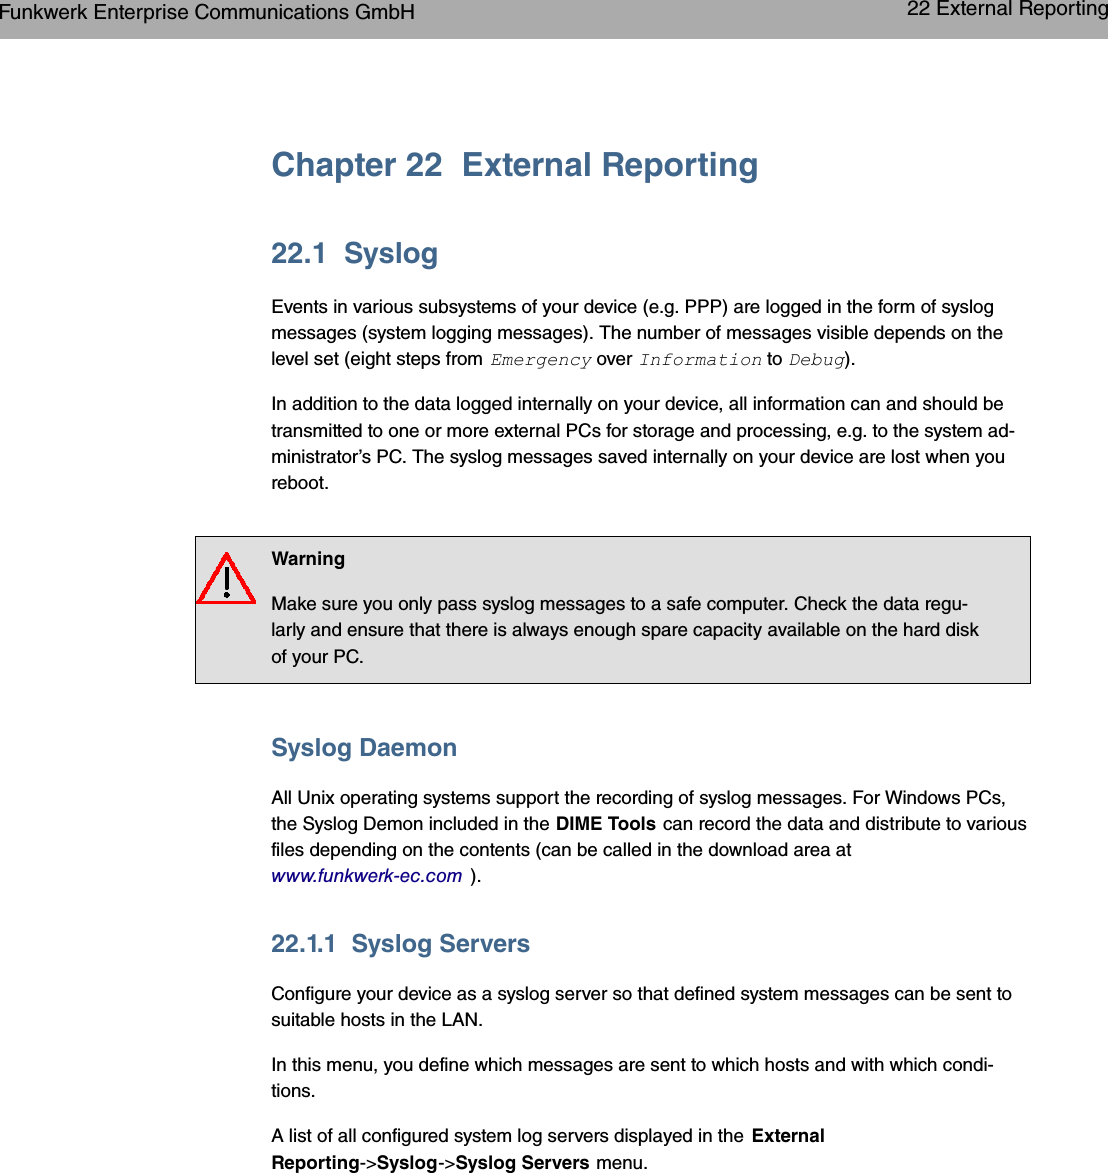 Chapter 22 External Reporting22.1 SyslogEvents in various subsystems of your device (e.g. PPP) are logged in the form of syslogmessages (system logging messages). The number of messages visible depends on thelevel set (eight steps from *$- over 6&quot; to 8#$).In addition to the data logged internally on your device, all information can and should betransmitted to one or more external PCs for storage and processing, e.g. to the system ad-ministrator’s PC. The syslog messages saved internally on your device are lost when youreboot.WarningMake sure you only pass syslog messages to a safe computer. Check the data regu-larly and ensure that there is always enough spare capacity available on the hard diskof your PC.Syslog DaemonAll Unix operating systems support the recording of syslog messages. For Windows PCs,the Syslog Demon included in the DIME Tools can record the data and distribute to variousfiles depending on the contents (can be called in the download area atwww.funkwerk-ec.com ).22.1.1 Syslog ServersConfigure your device as a syslog server so that defined system messages can be sent tosuitable hosts in the LAN.In this menu, you define which messages are sent to which hosts and with which condi-tions.A list of all configured system log servers displayed in the ExternalReporting-&gt;Syslog-&gt;Syslog Servers menu.Funkwerk Enterprise Communications GmbH 22 External Reportingbintec WLAN and Industrial WLAN 321